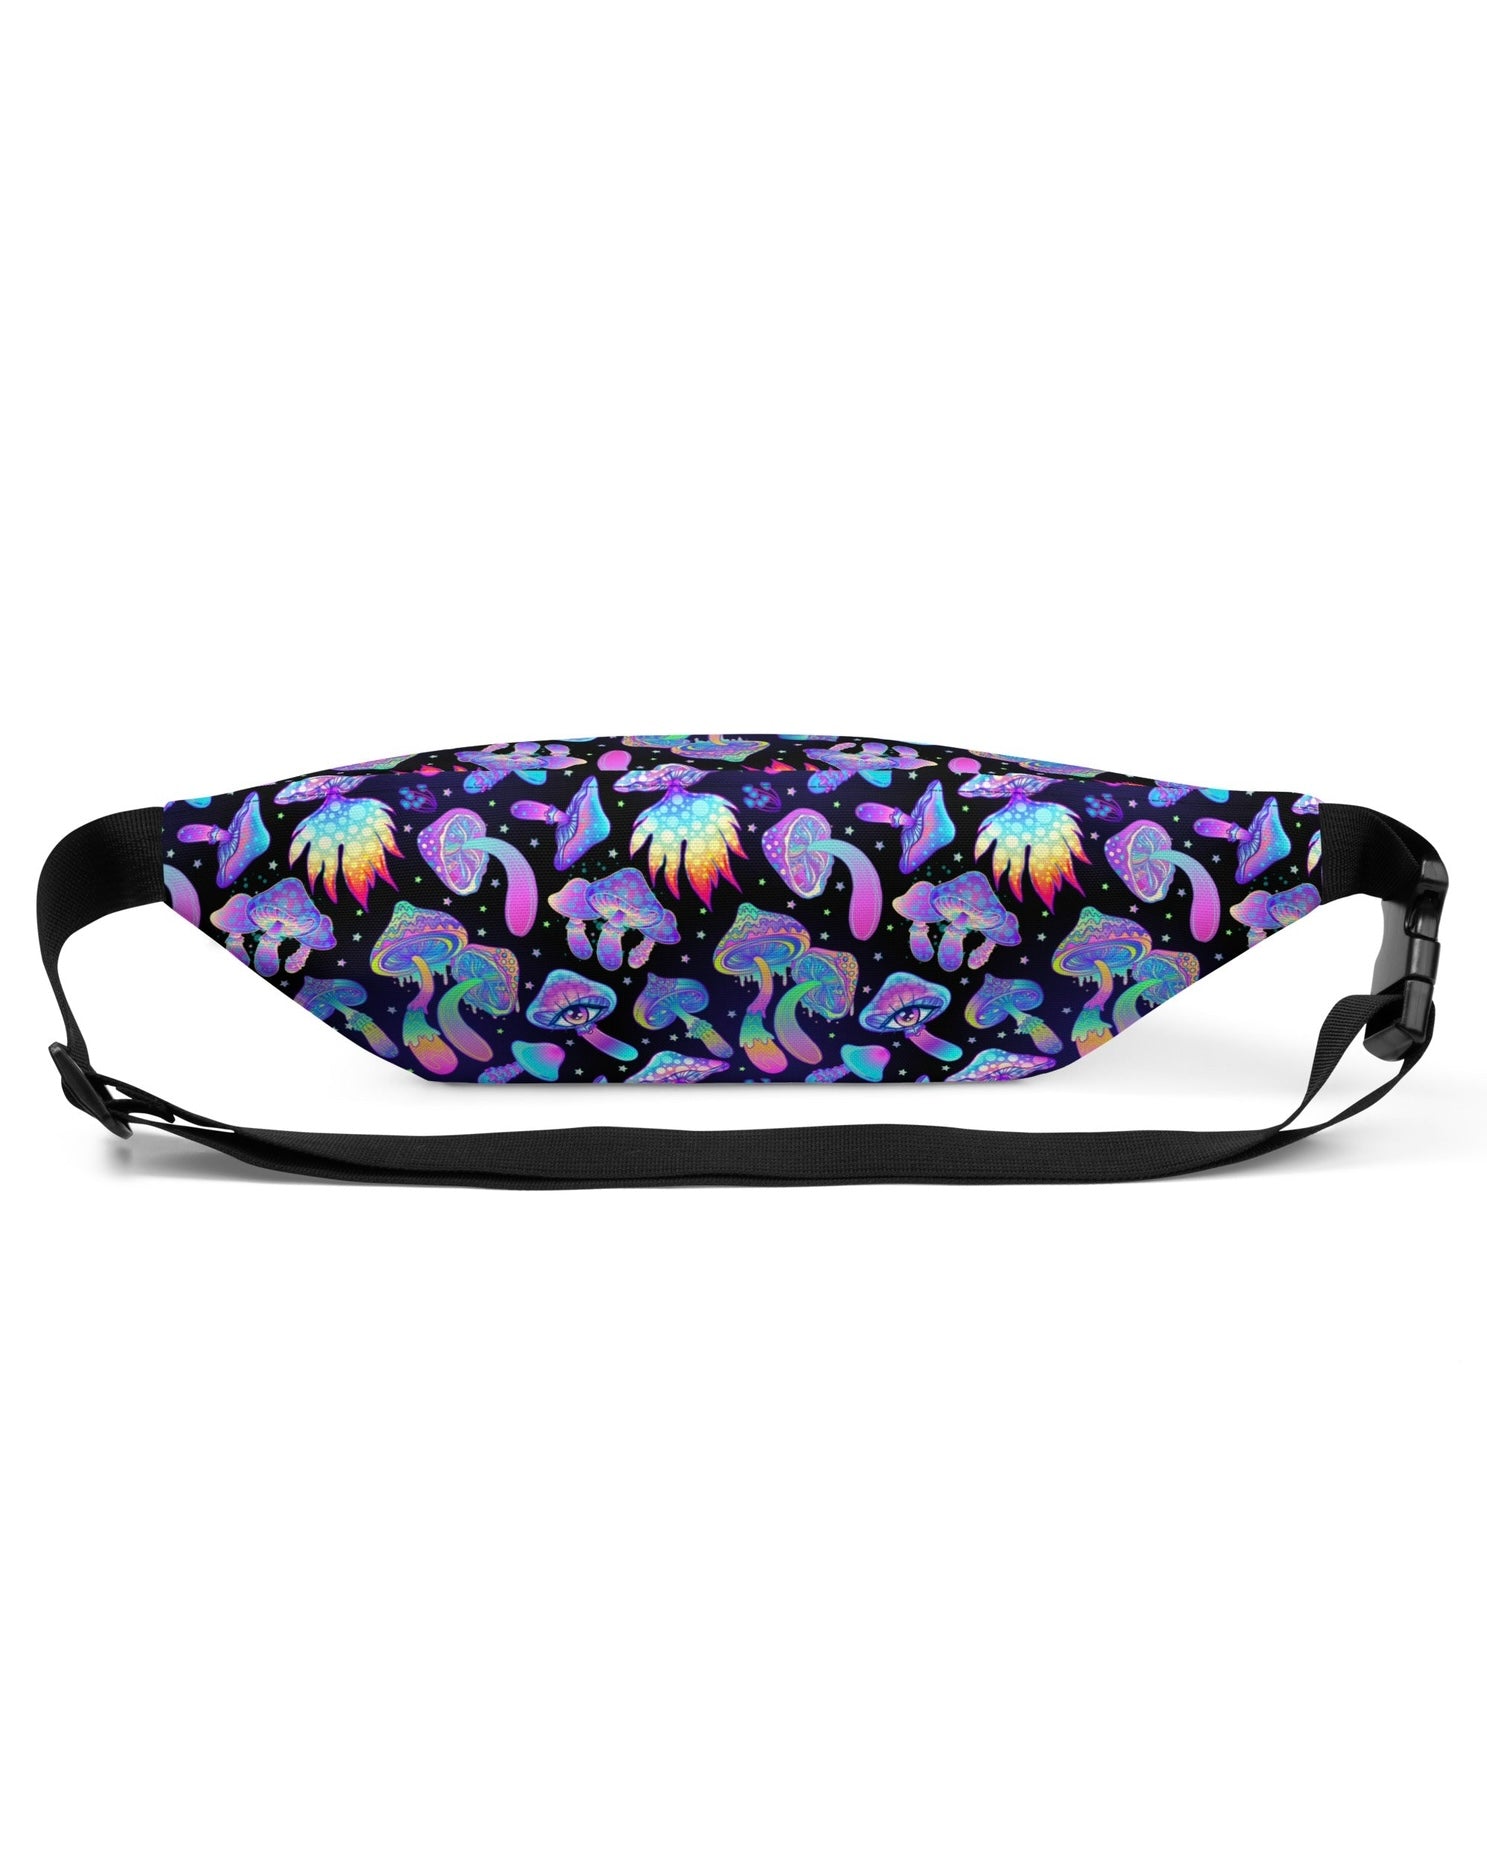 Shroomin Black Fanny Pack, Fanny Pack, - One Stop Rave